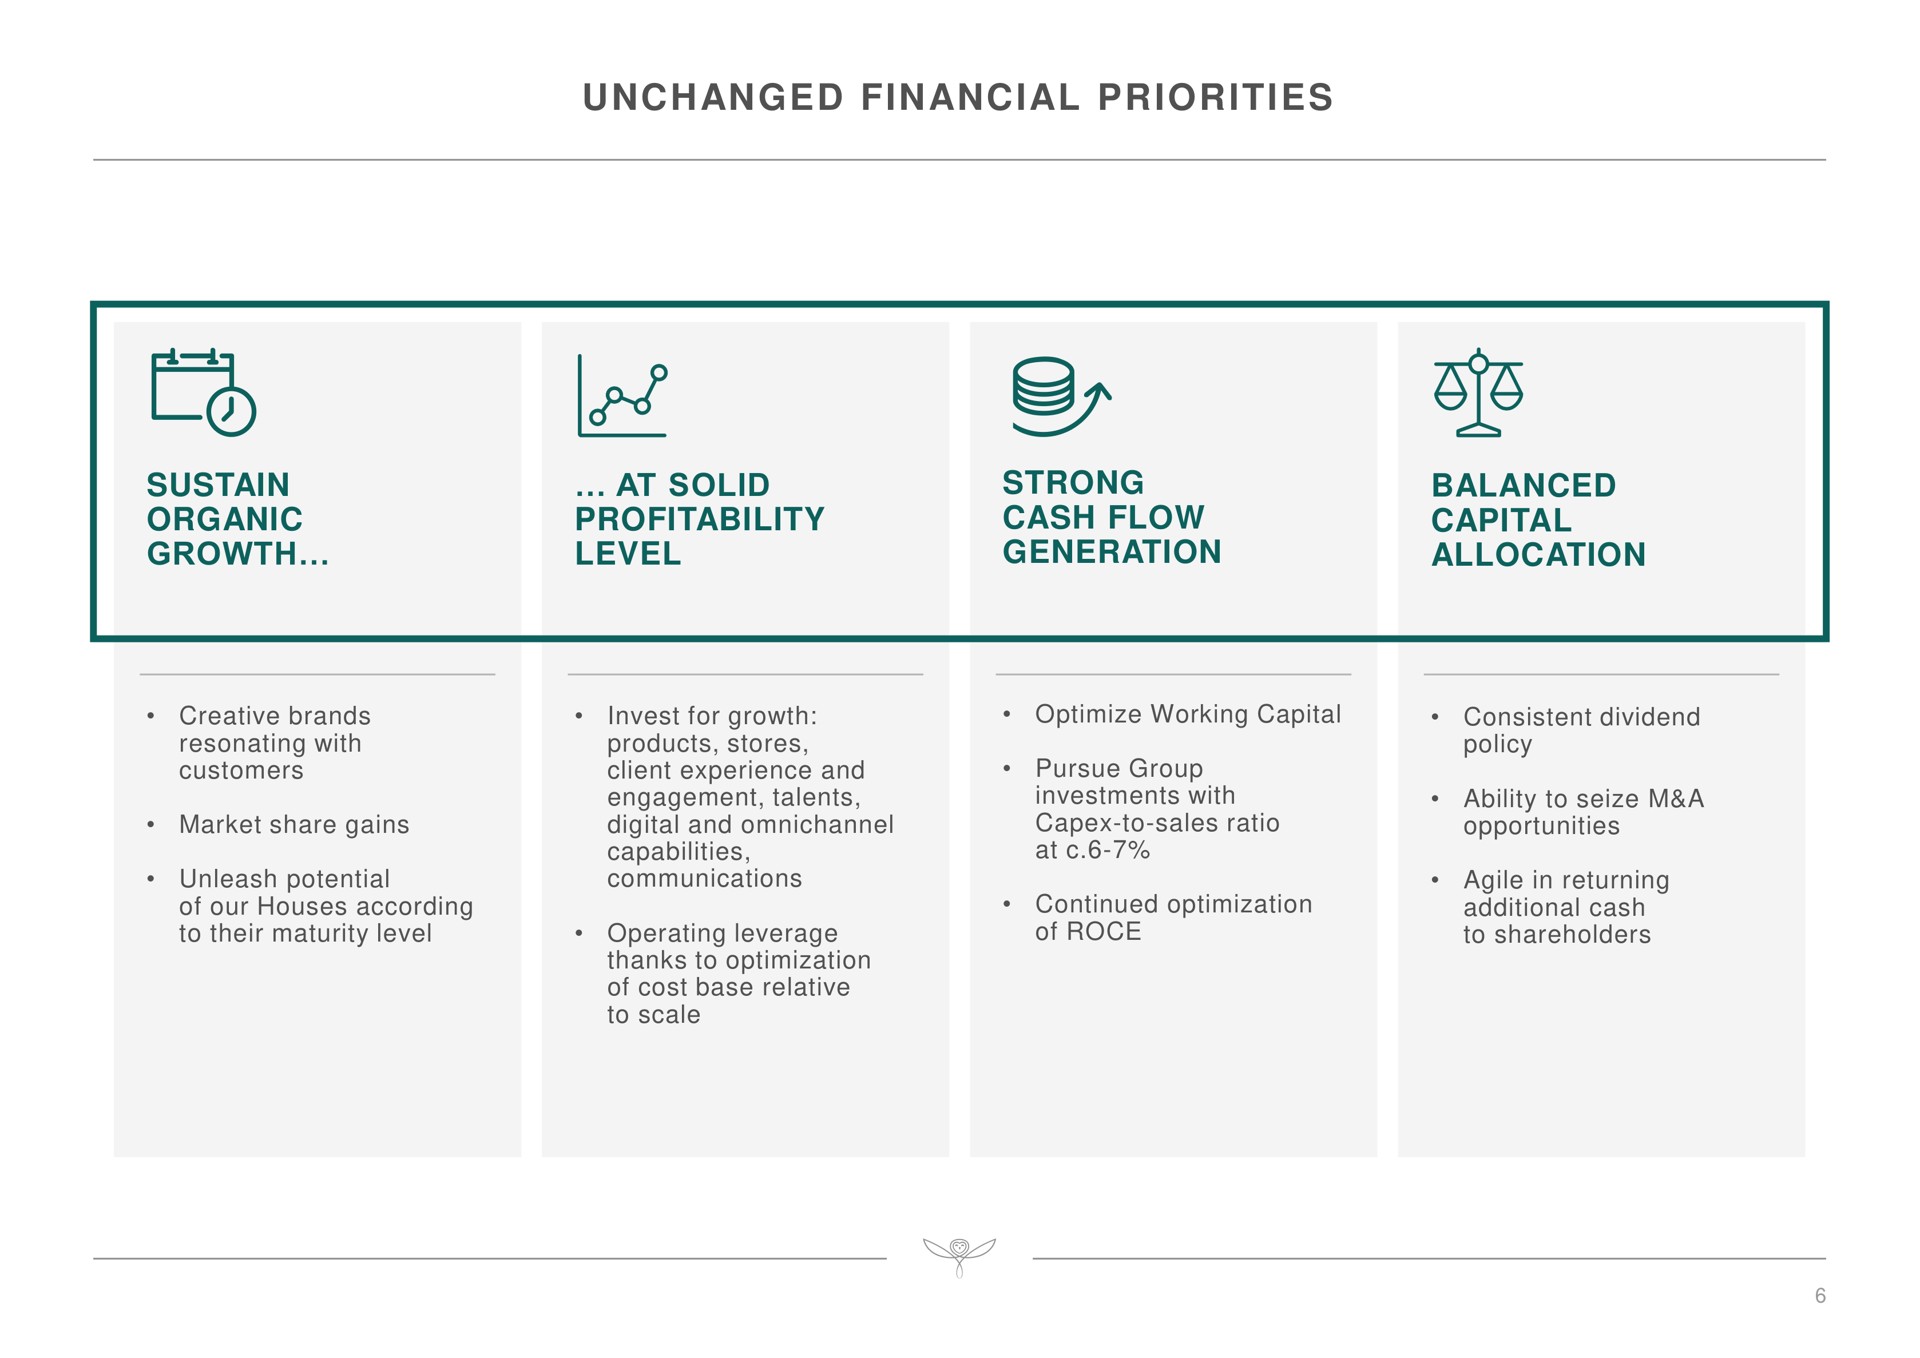 unchanged financial priorities sustain organic growth at solid profitability level strong cash flow generation balanced capital allocation | Kering